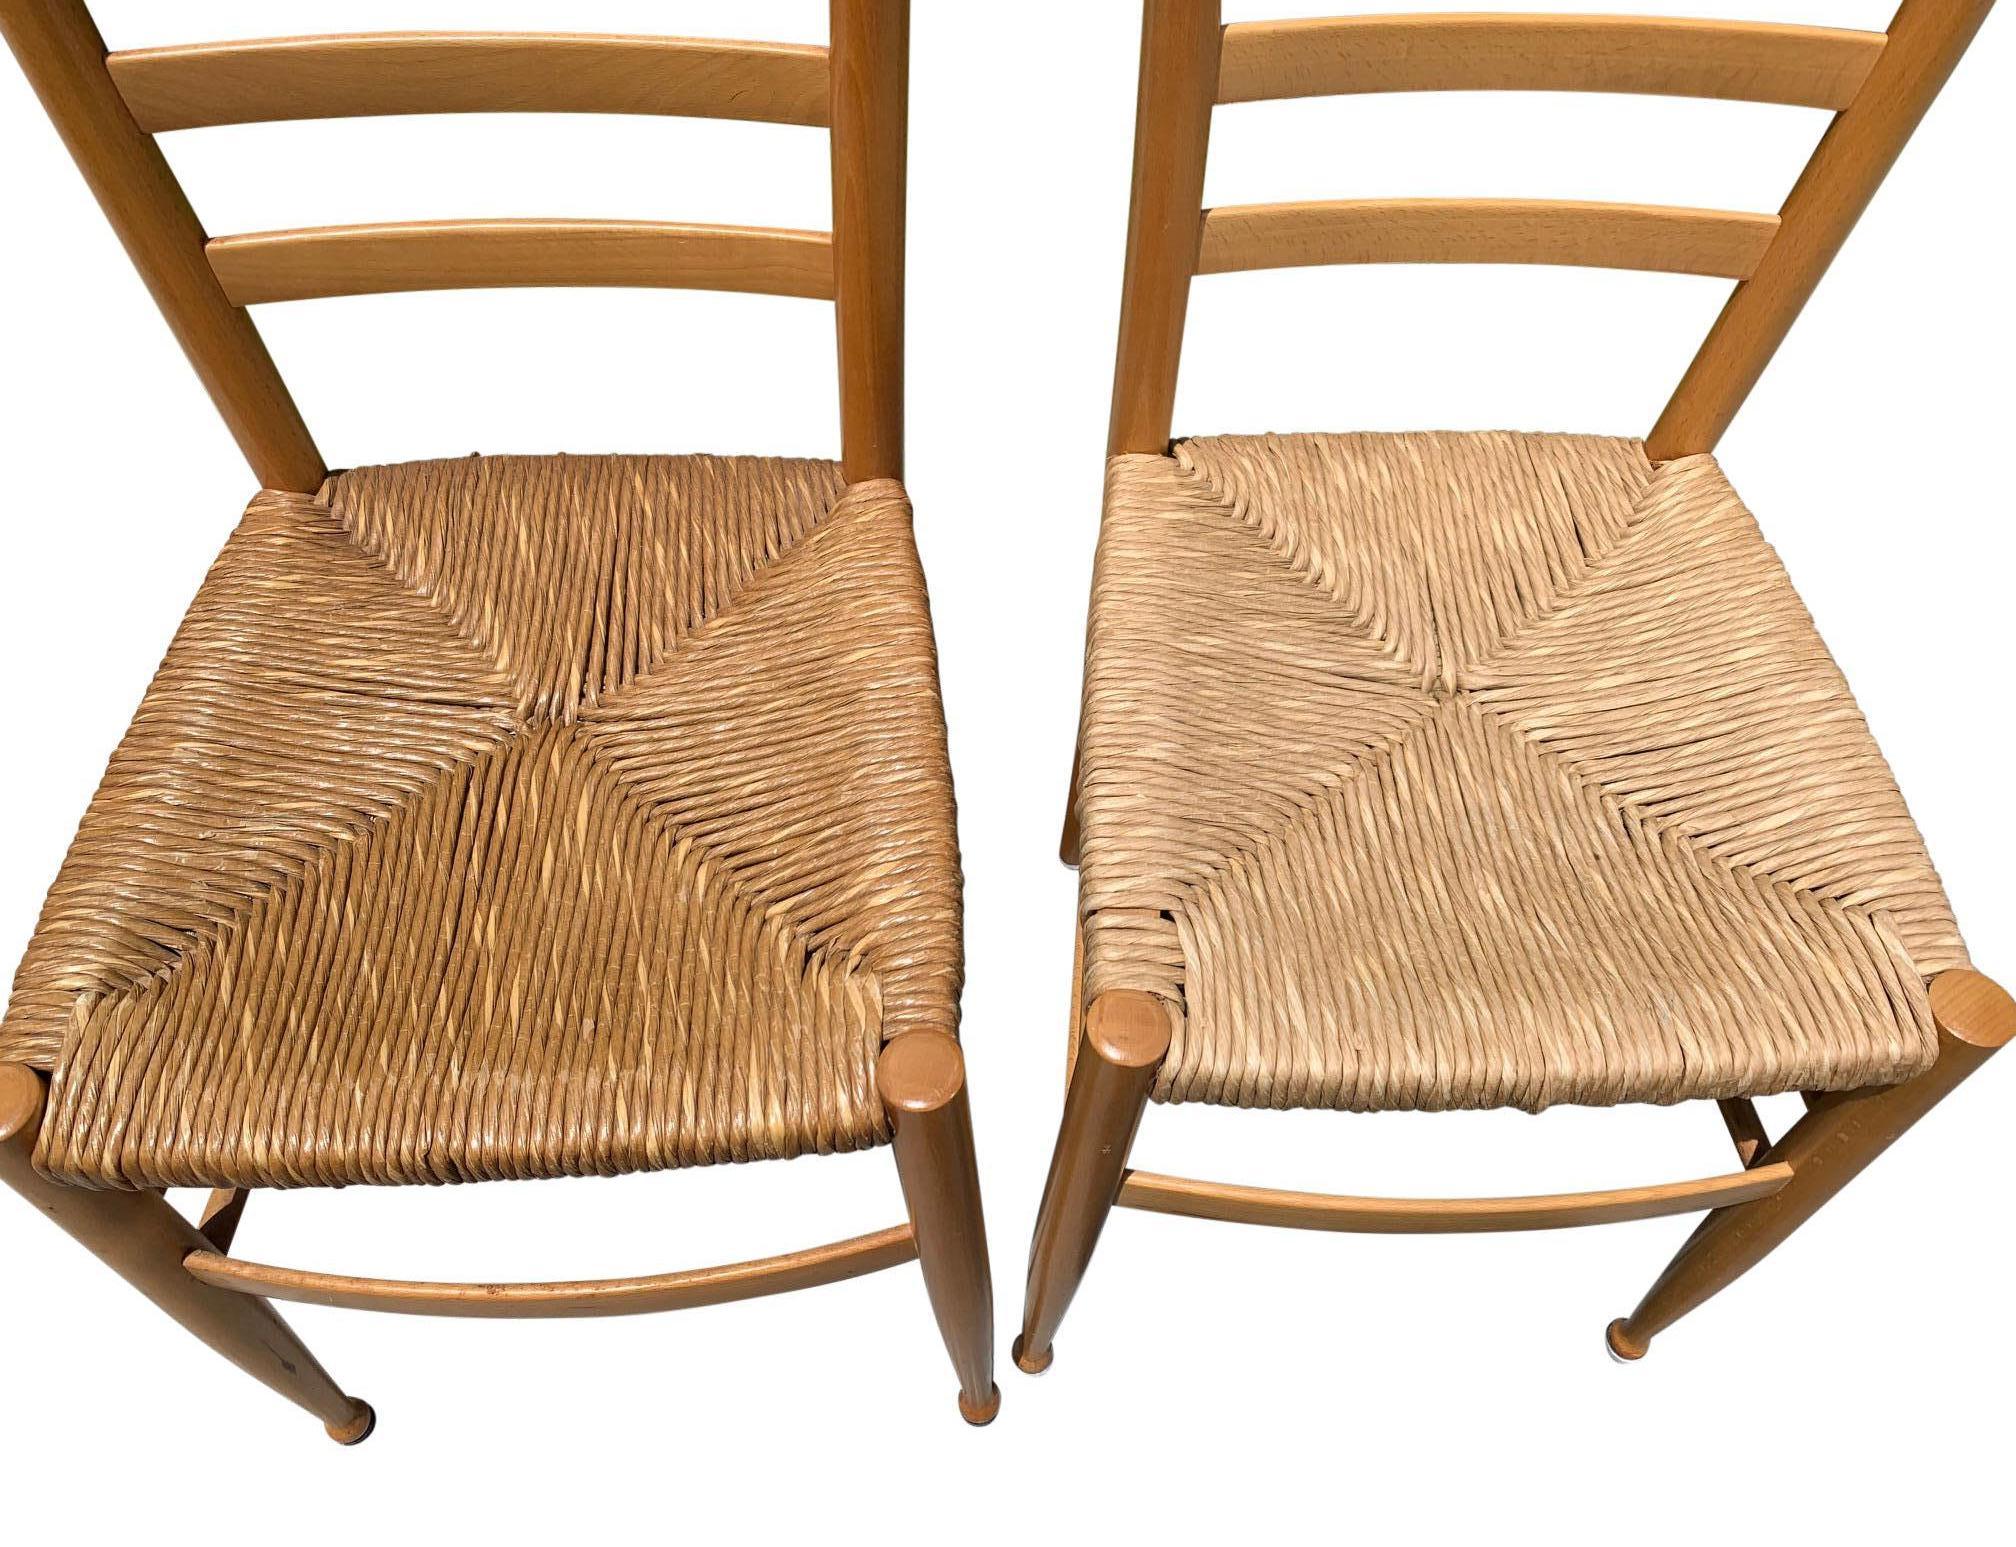 Pair of Wood Italian Ladder Back Chairs Attributed to Gio Ponti 1